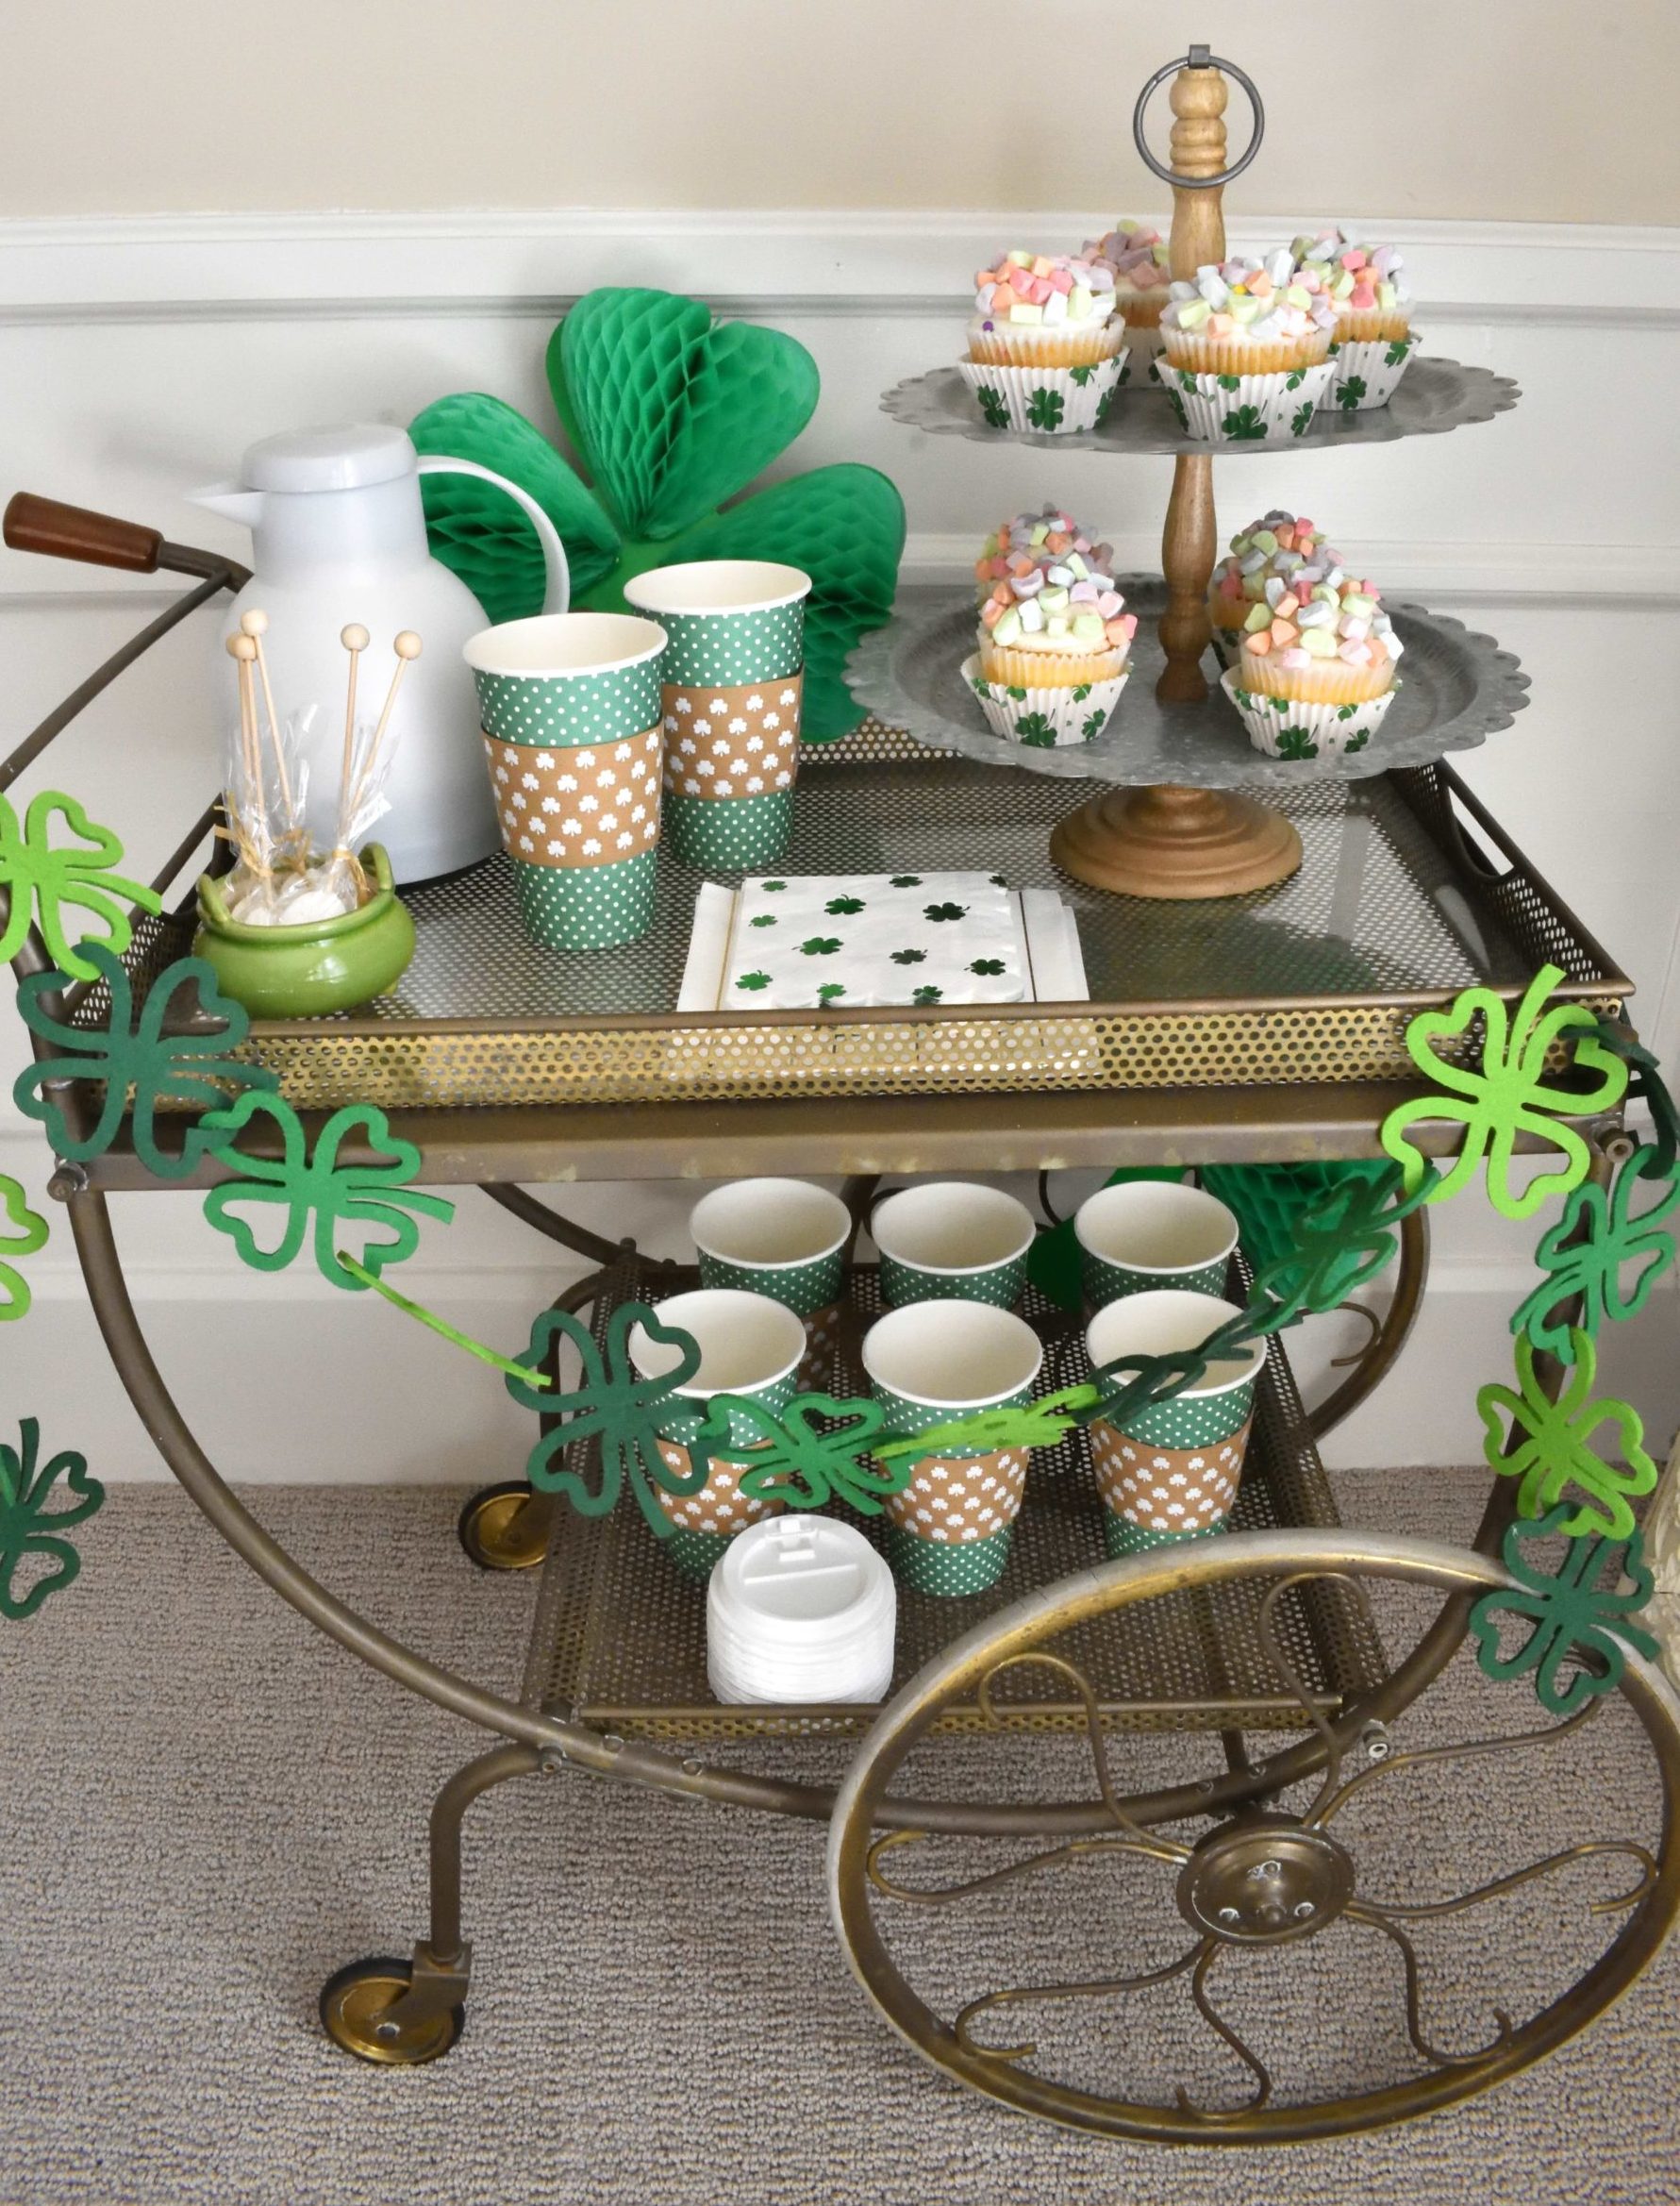 St. Paddy's cocoa and cupcakes